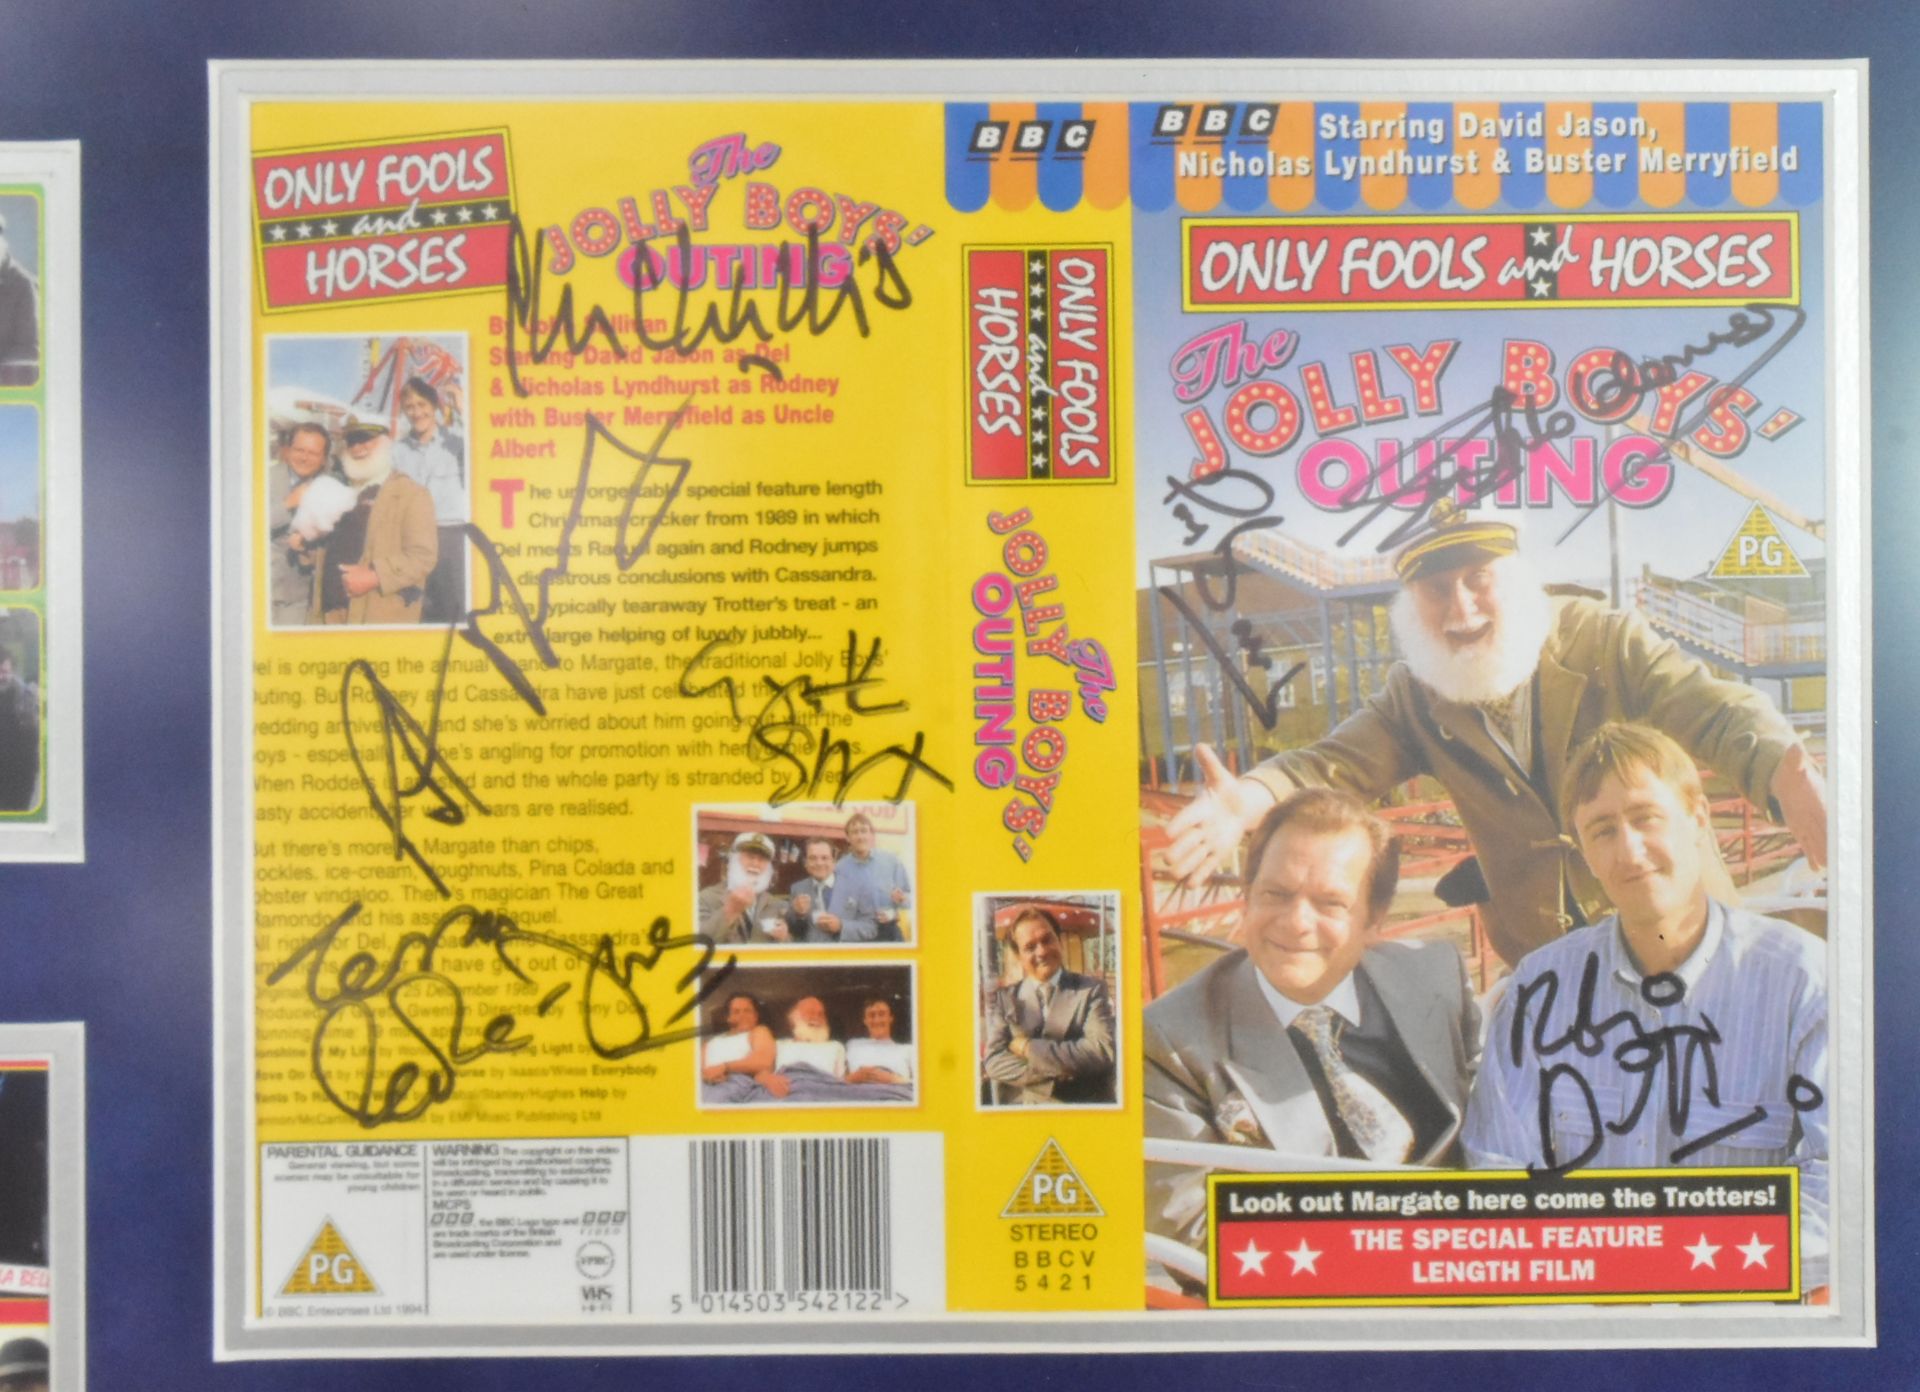 ONLY FOOLS & HORSES - THE JOLLY BOYS' OUTING - WHOLE CAST AUTOGRAPHS - Image 3 of 4